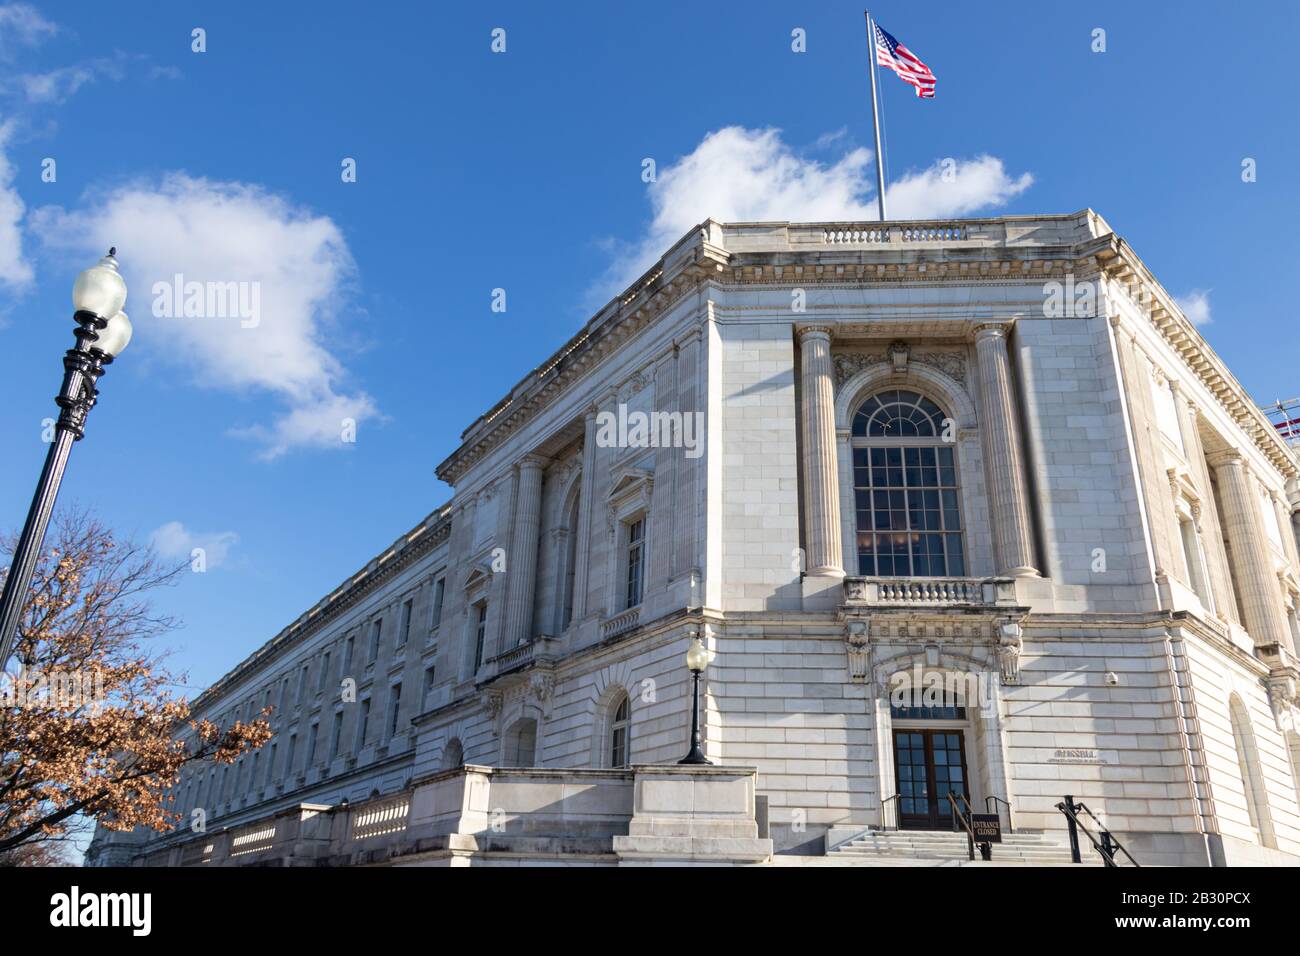 Entrance to the Russell Senate Office Building across from the U.S. Capitol on a beautiful, sunny day. Stock Photo